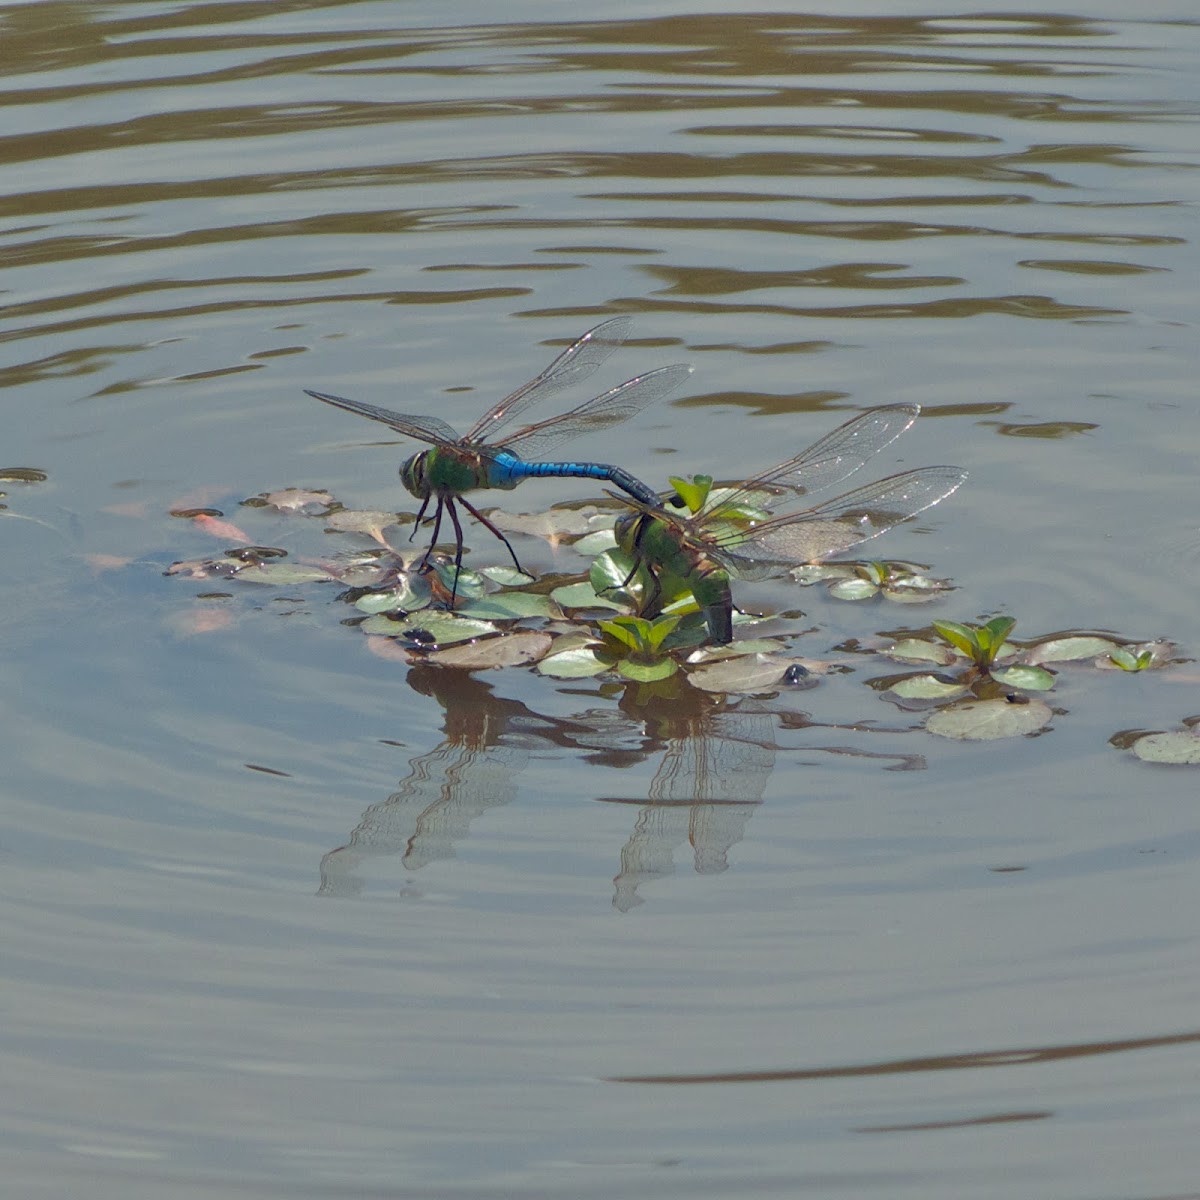 Common Green Darner dragonflies (mating pair)